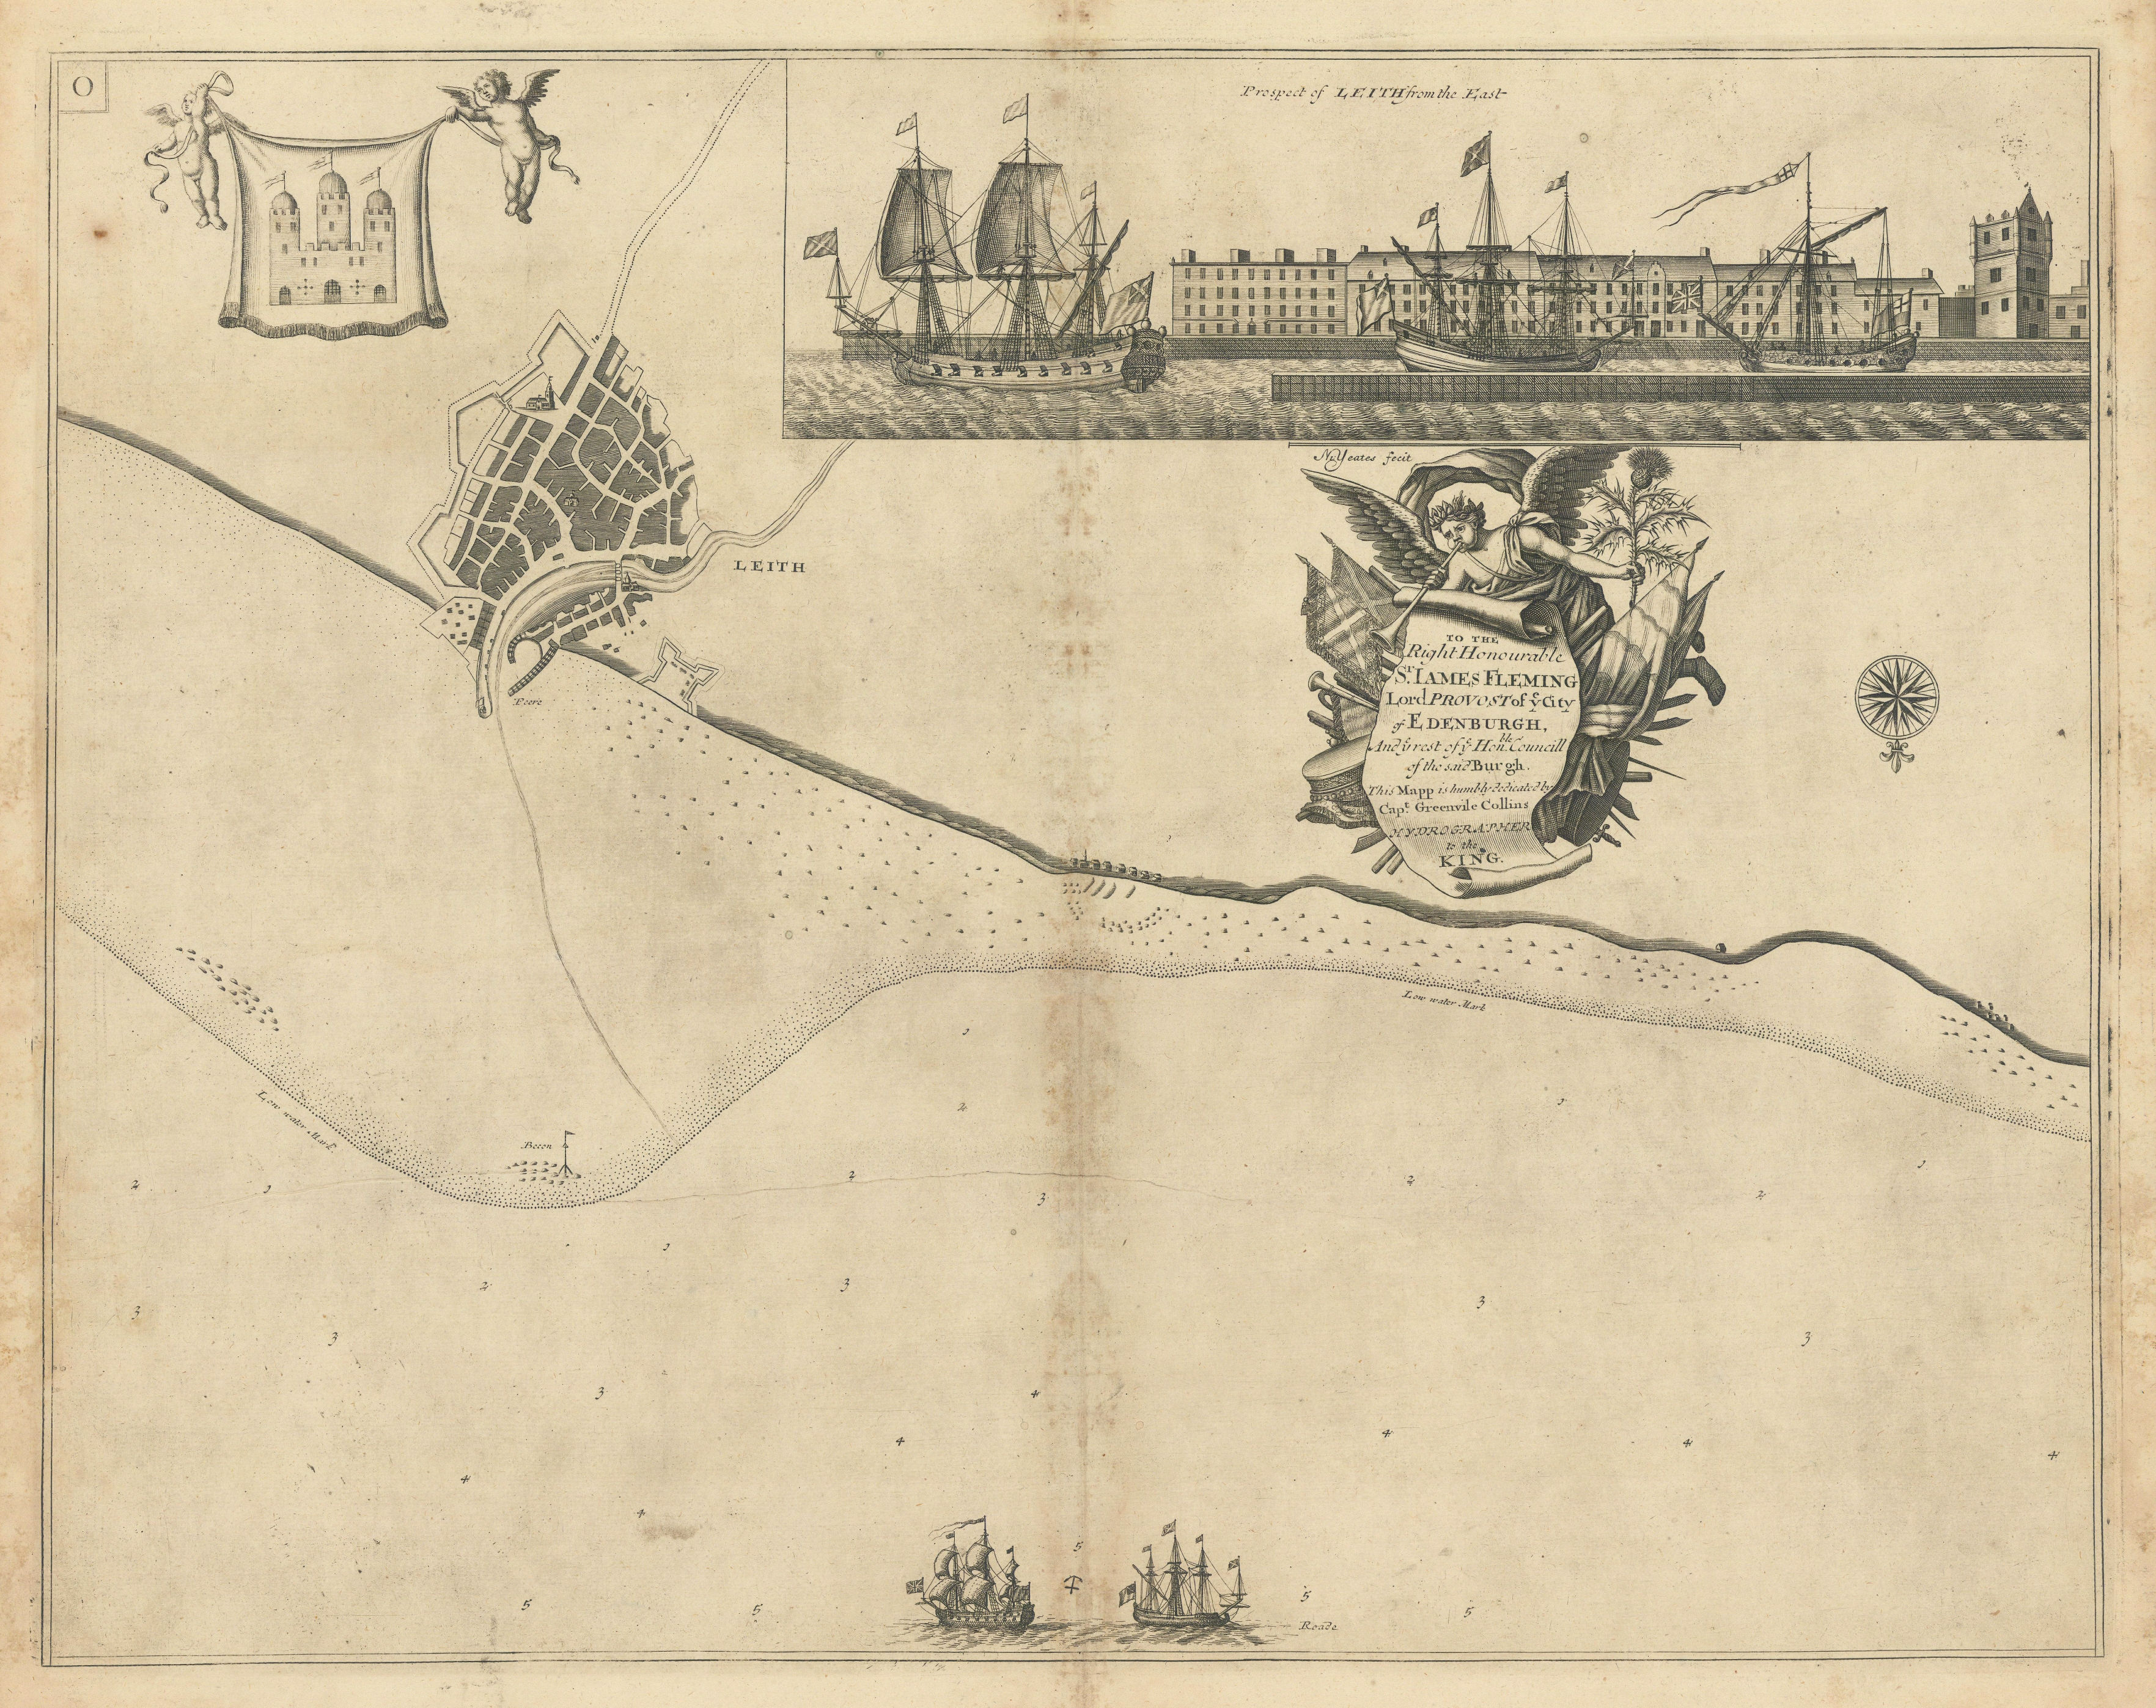 Associate Product Navigation chart & view of LEITH, by Capt Greenvile COLLINS. Edinburgh 1723 map